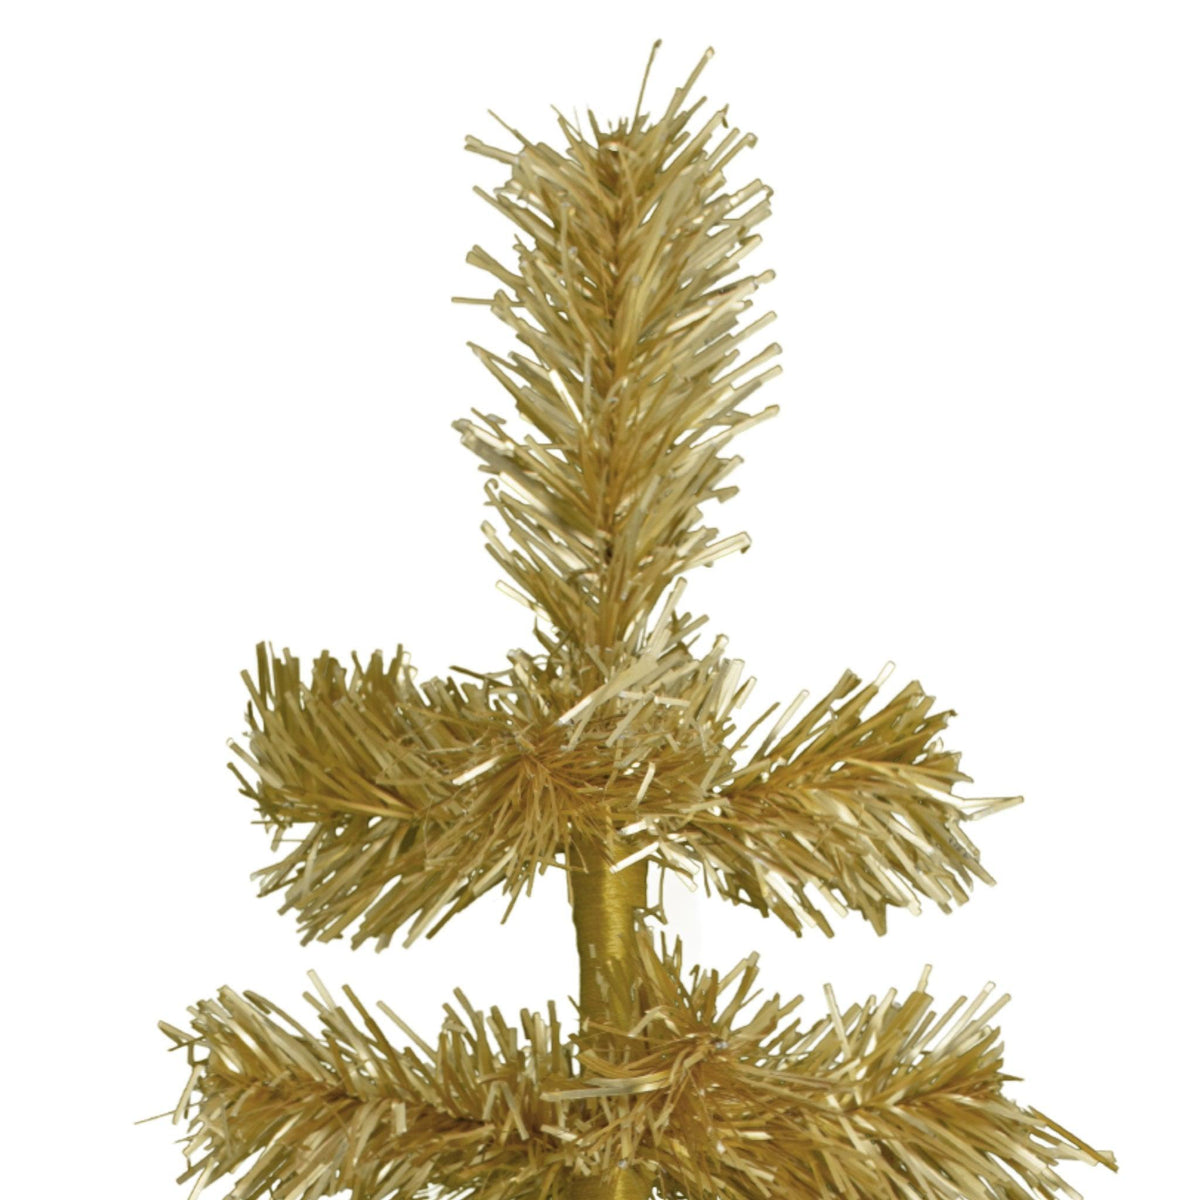 Our 24in Tall Antique Gold Christmas Tree.  Celebrate Lee Display's 120th Anniversary with our brand new Antique Gold colored tinsel Christmas Trees.  Shop for antique gold christmas trees at leedisplay.com